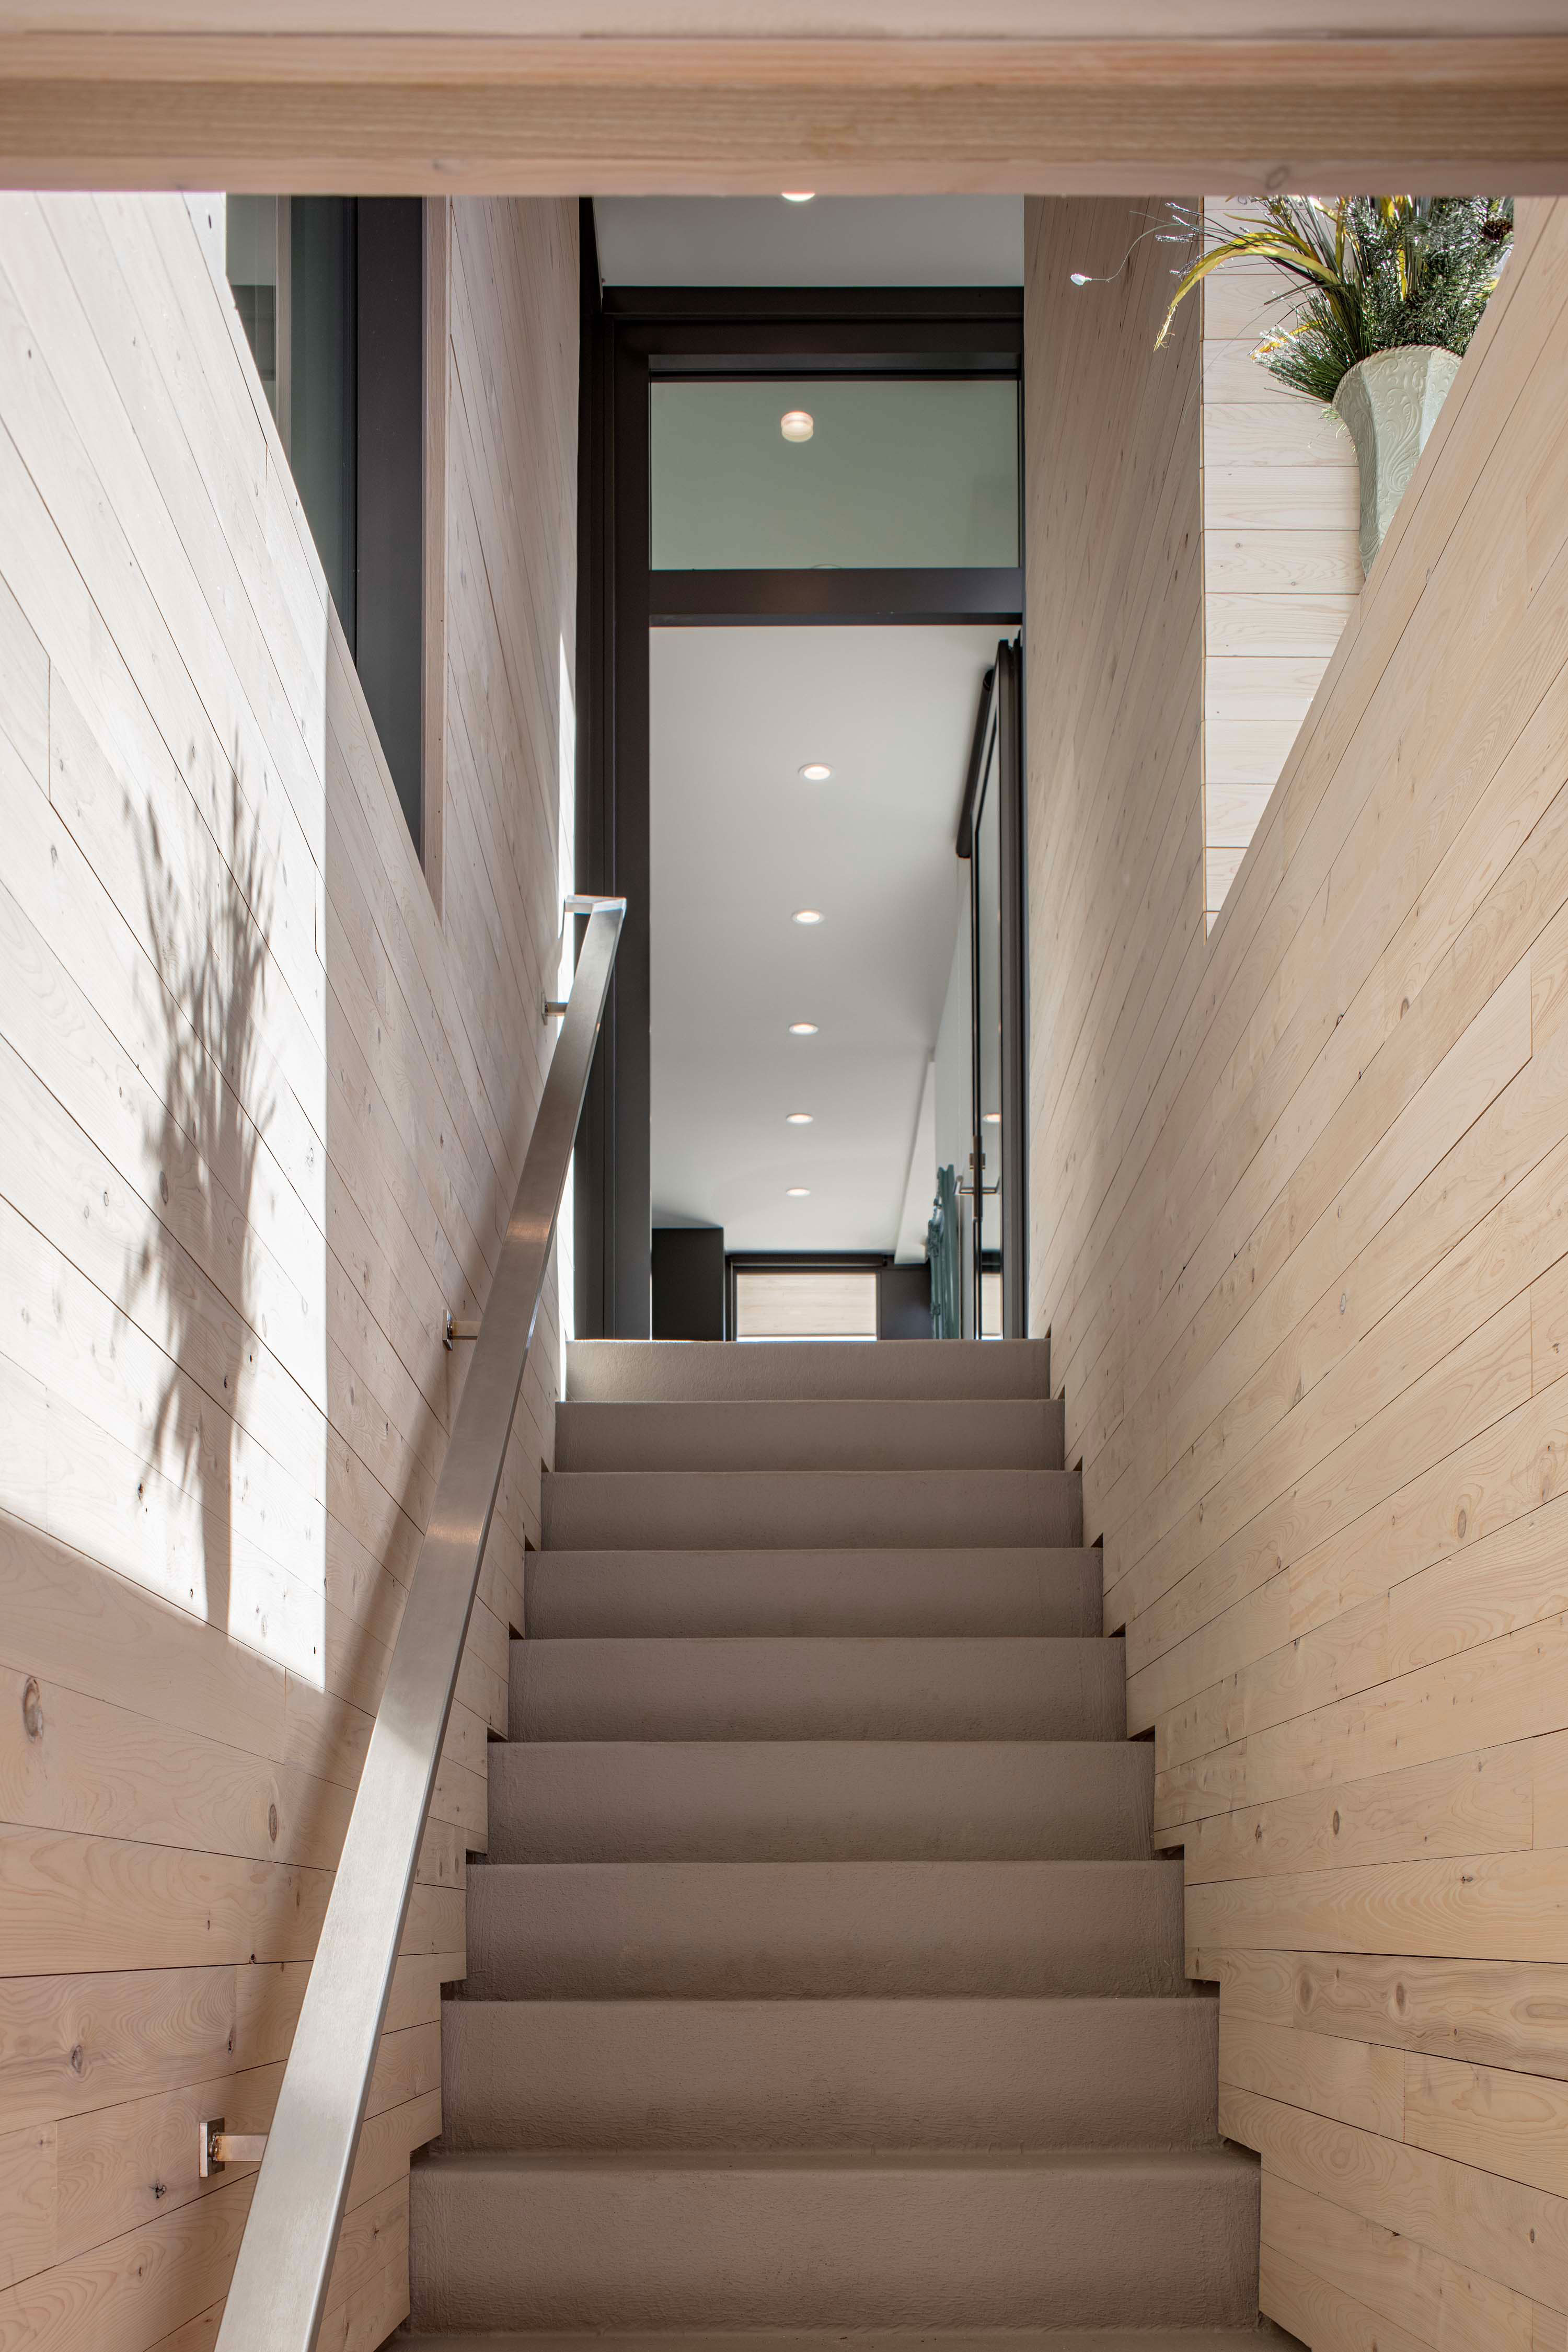 Exterior photo of the Beach Haven Residence by Specht Novak Architects. Shot by Taggart Sorenson featuring stairs framed by the structure of the home.